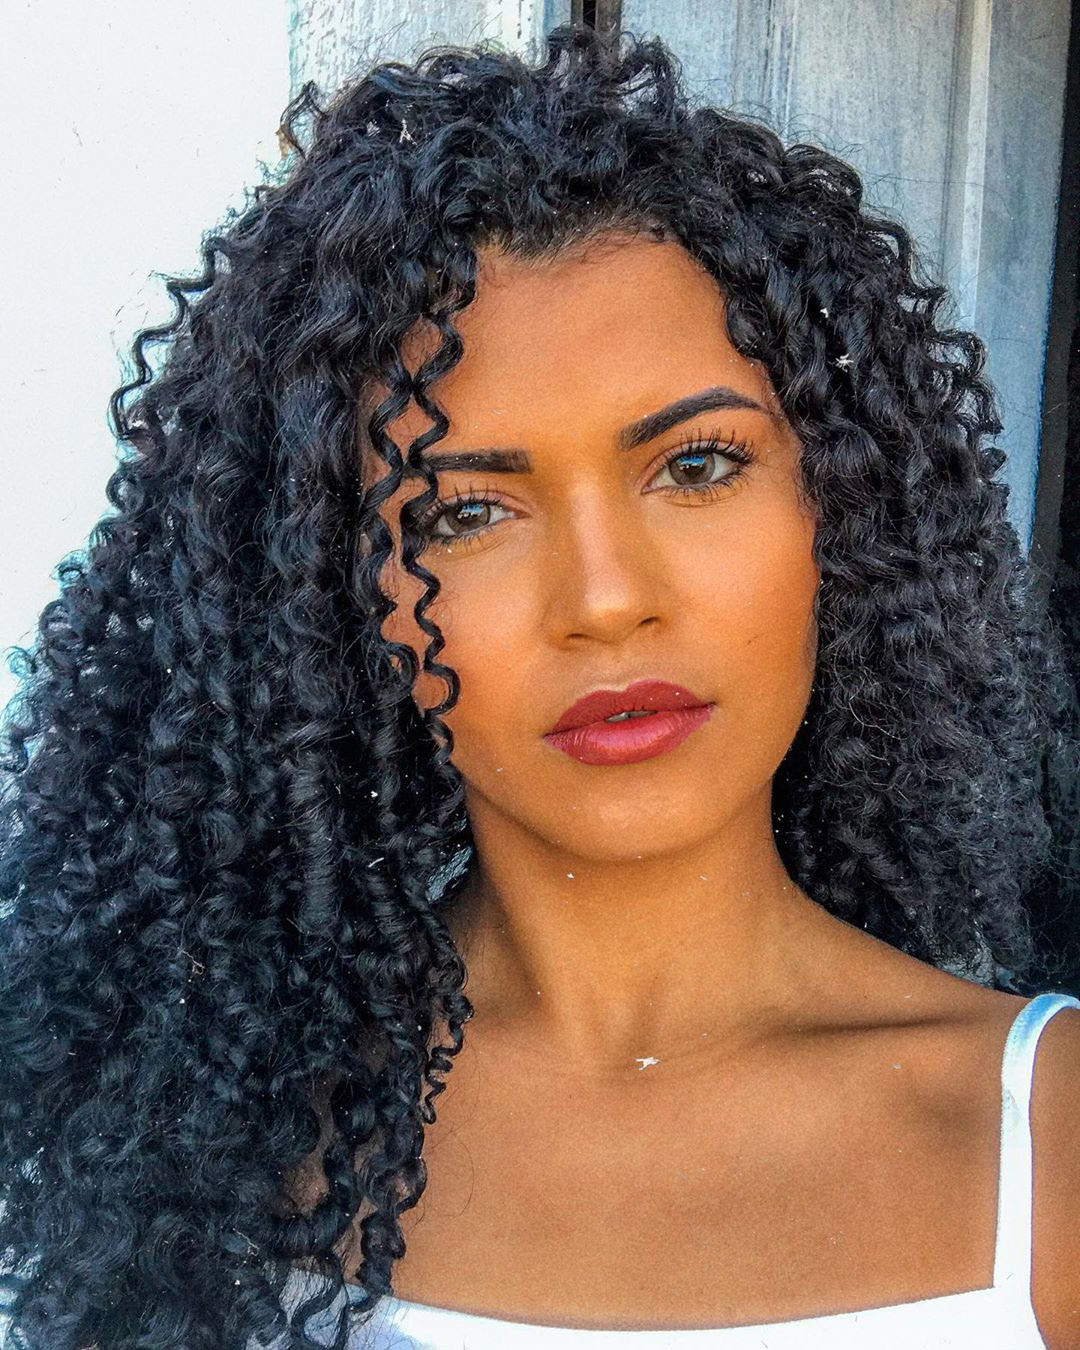 80+ Long Curly Hairstyles for Girls Following Fashion Trends